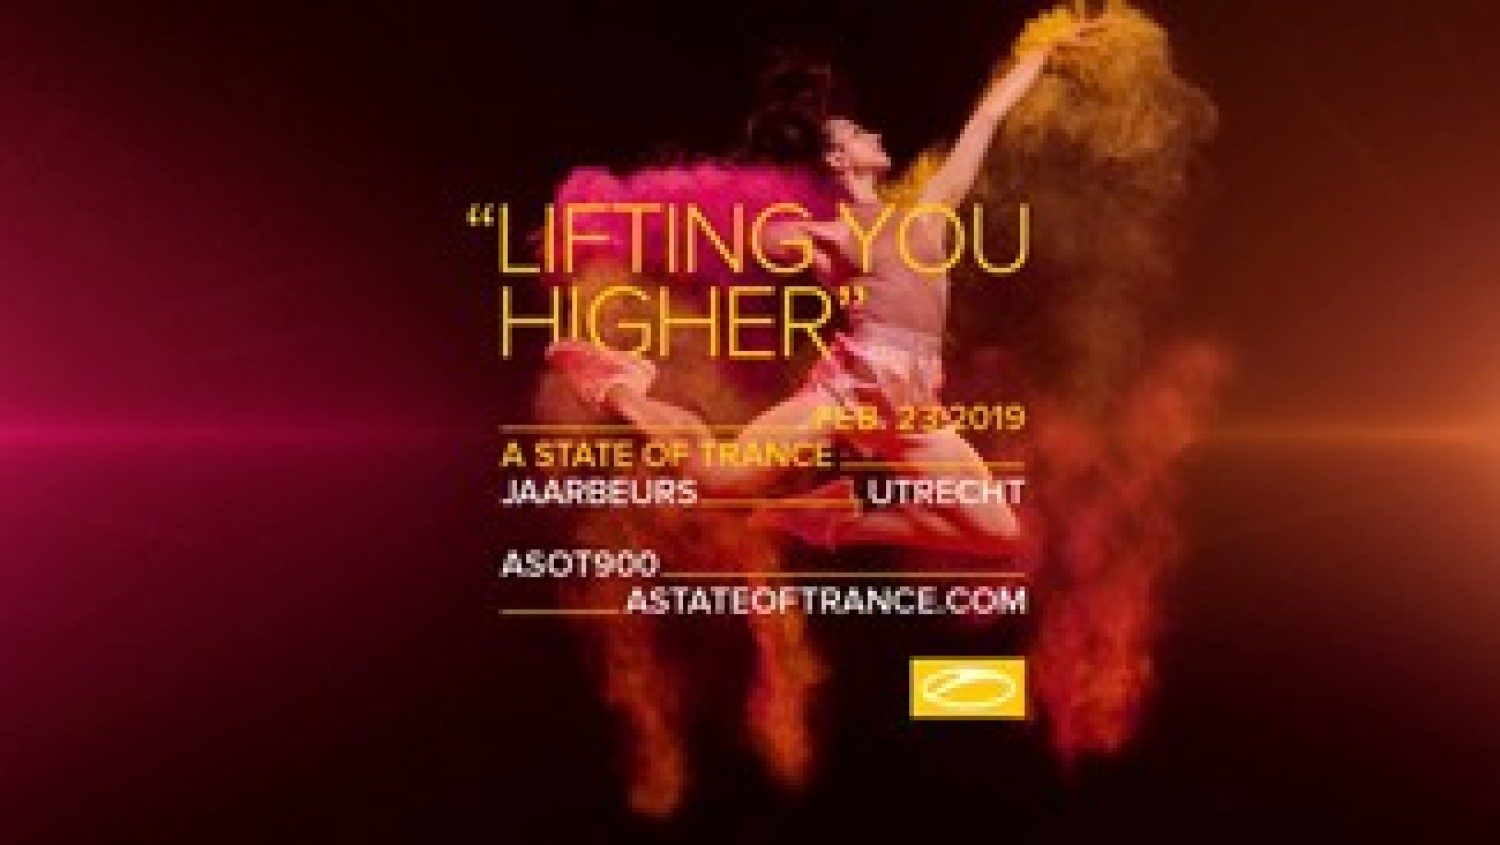 Party nieuws: A State of Trance 900 Festival is uitverkocht!